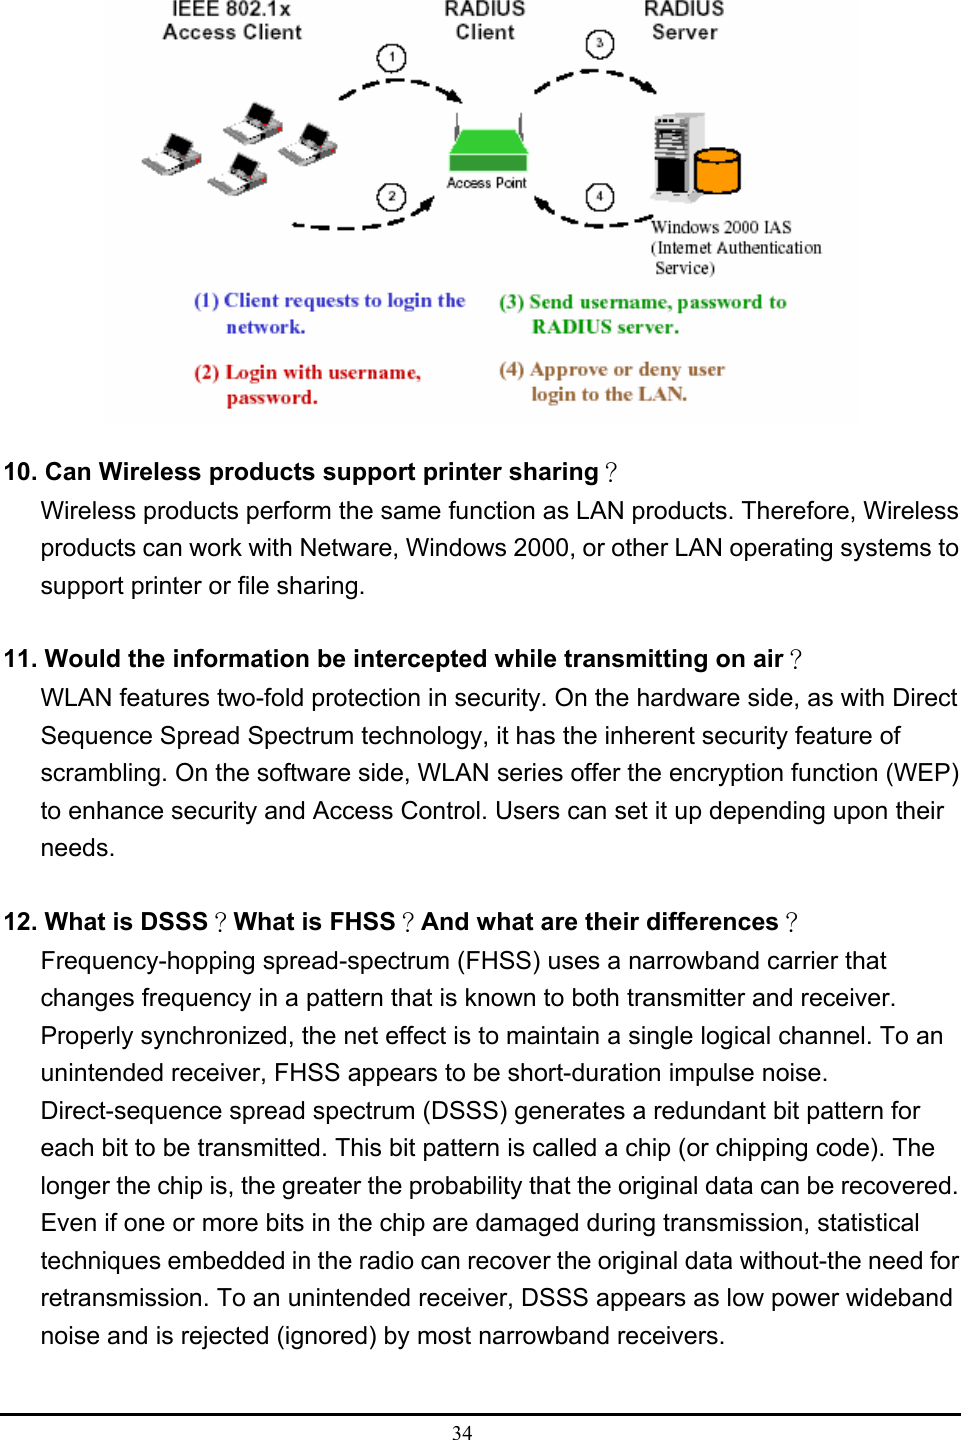  34   10. Can Wireless products support printer sharing？ Wireless products perform the same function as LAN products. Therefore, Wireless products can work with Netware, Windows 2000, or other LAN operating systems to support printer or file sharing.  11. Would the information be intercepted while transmitting on air？ WLAN features two-fold protection in security. On the hardware side, as with Direct Sequence Spread Spectrum technology, it has the inherent security feature of scrambling. On the software side, WLAN series offer the encryption function (WEP) to enhance security and Access Control. Users can set it up depending upon their needs.  12. What is DSSS？What is FHSS？And what are their differences？ Frequency-hopping spread-spectrum (FHSS) uses a narrowband carrier that changes frequency in a pattern that is known to both transmitter and receiver. Properly synchronized, the net effect is to maintain a single logical channel. To an unintended receiver, FHSS appears to be short-duration impulse noise. Direct-sequence spread spectrum (DSSS) generates a redundant bit pattern for each bit to be transmitted. This bit pattern is called a chip (or chipping code). The longer the chip is, the greater the probability that the original data can be recovered. Even if one or more bits in the chip are damaged during transmission, statistical techniques embedded in the radio can recover the original data without-the need for retransmission. To an unintended receiver, DSSS appears as low power wideband noise and is rejected (ignored) by most narrowband receivers.  